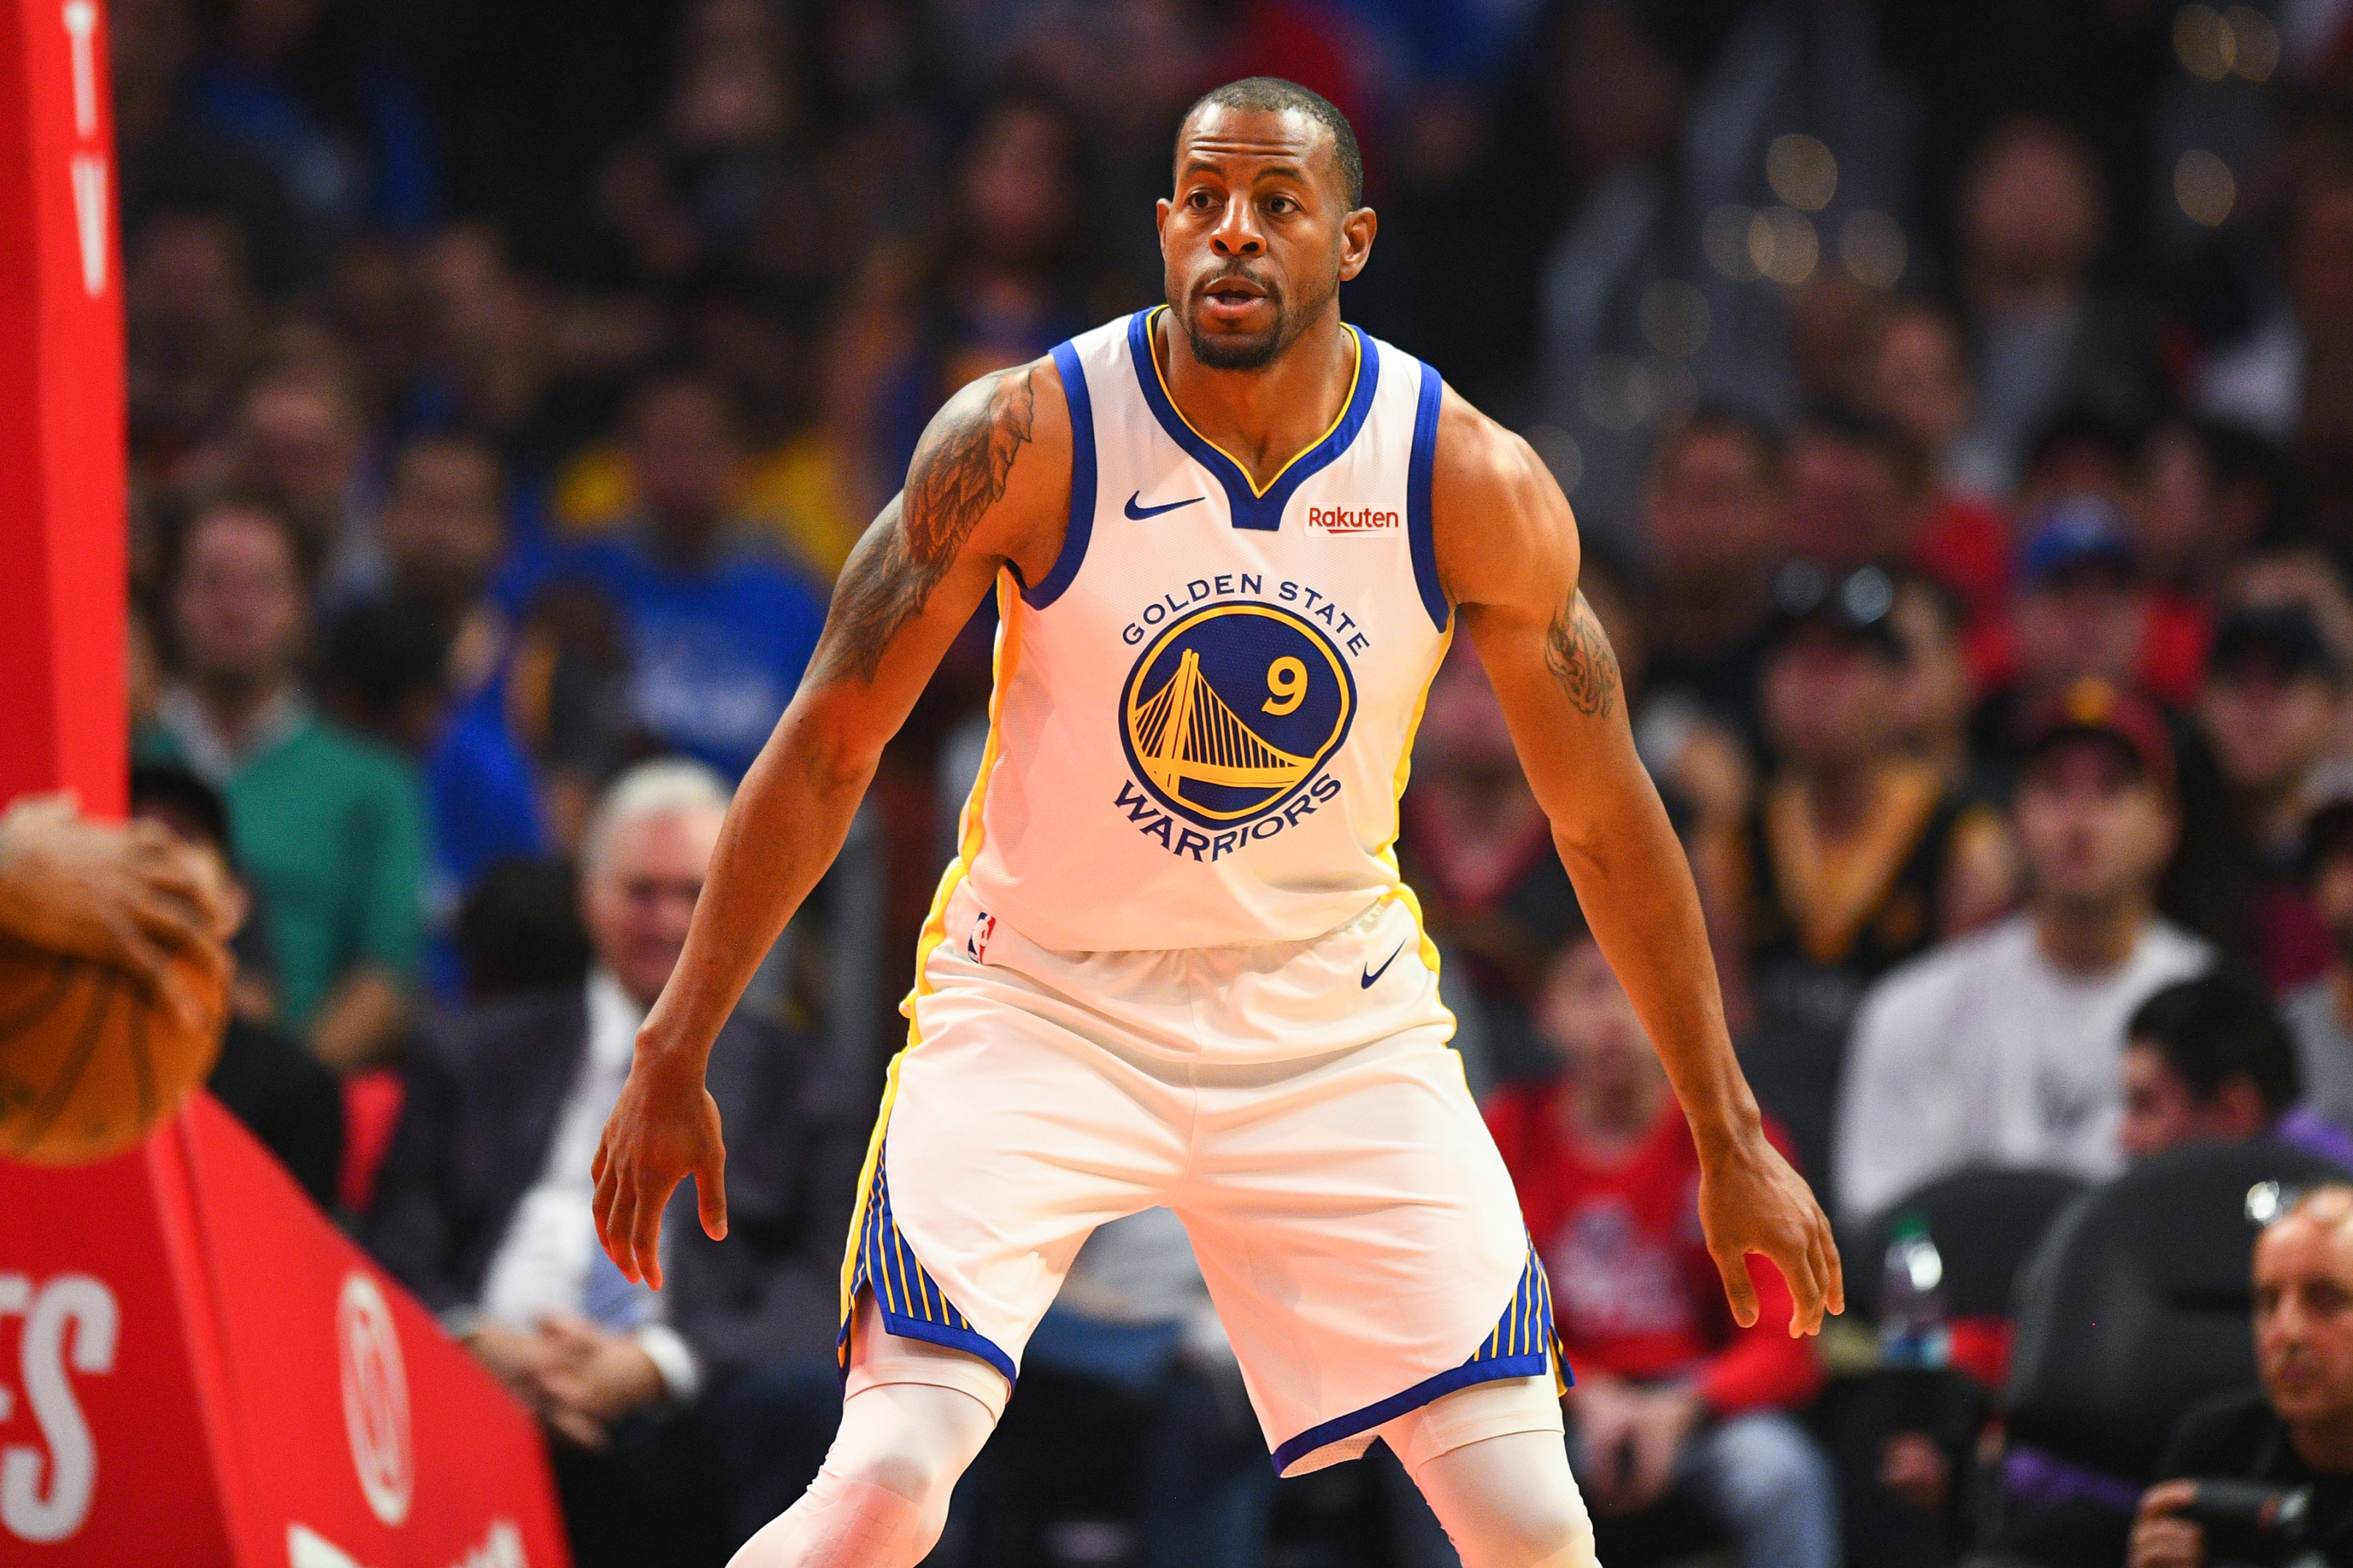 What teams has Andre Iguodala played for?